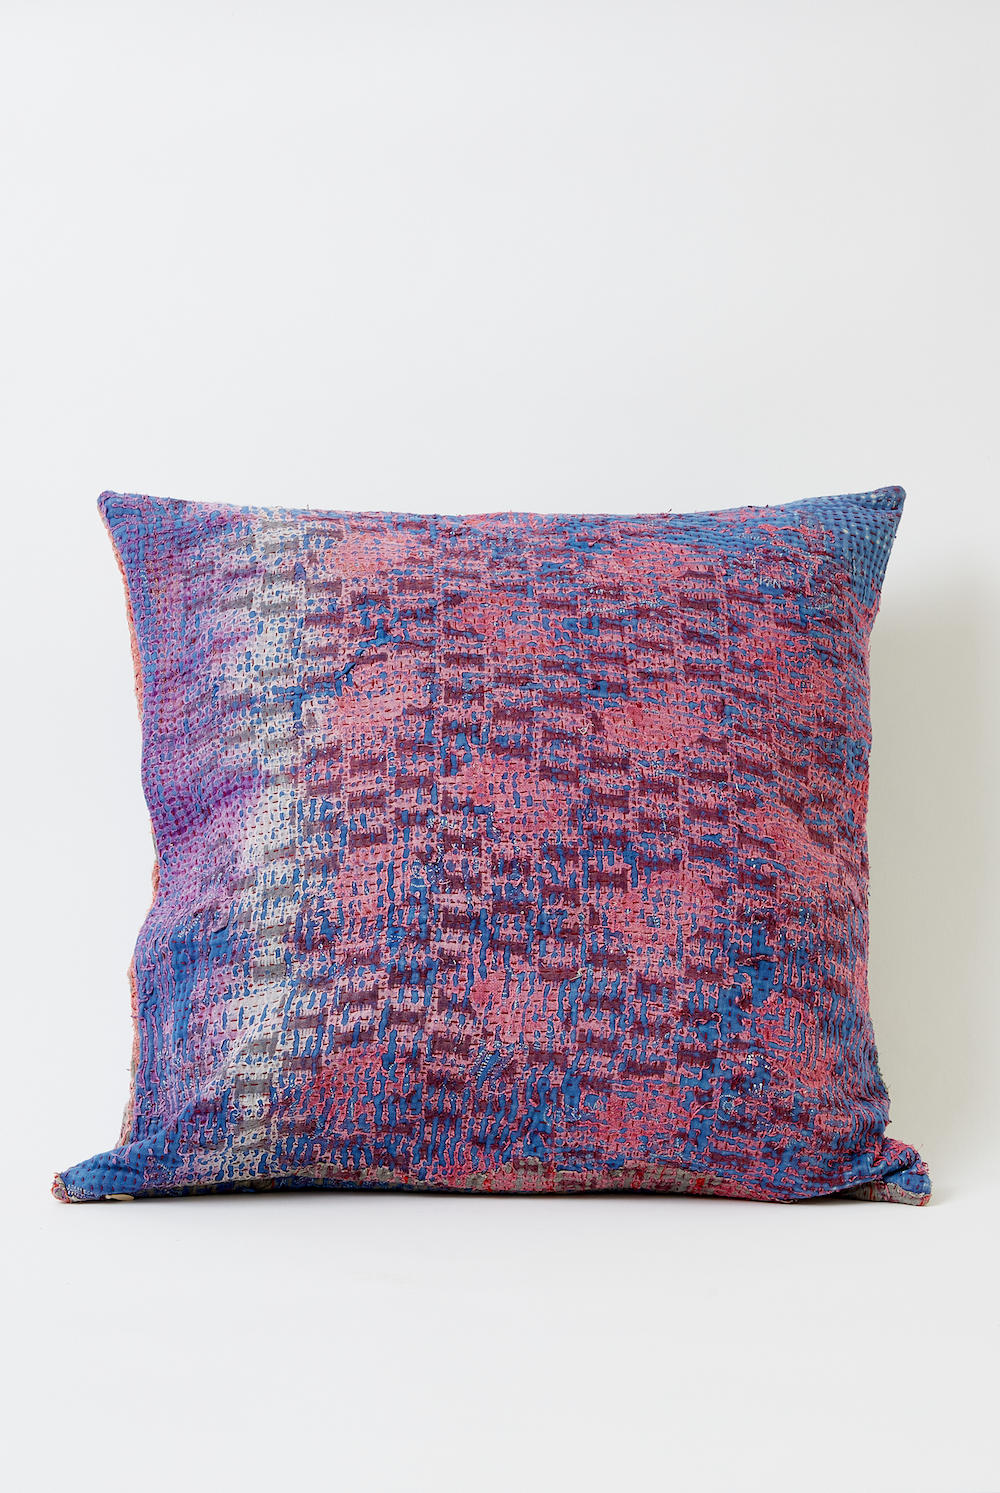 Kravet’s collab with Nadia Watts, noteworthy debuts from Studio Robert McKinley and more